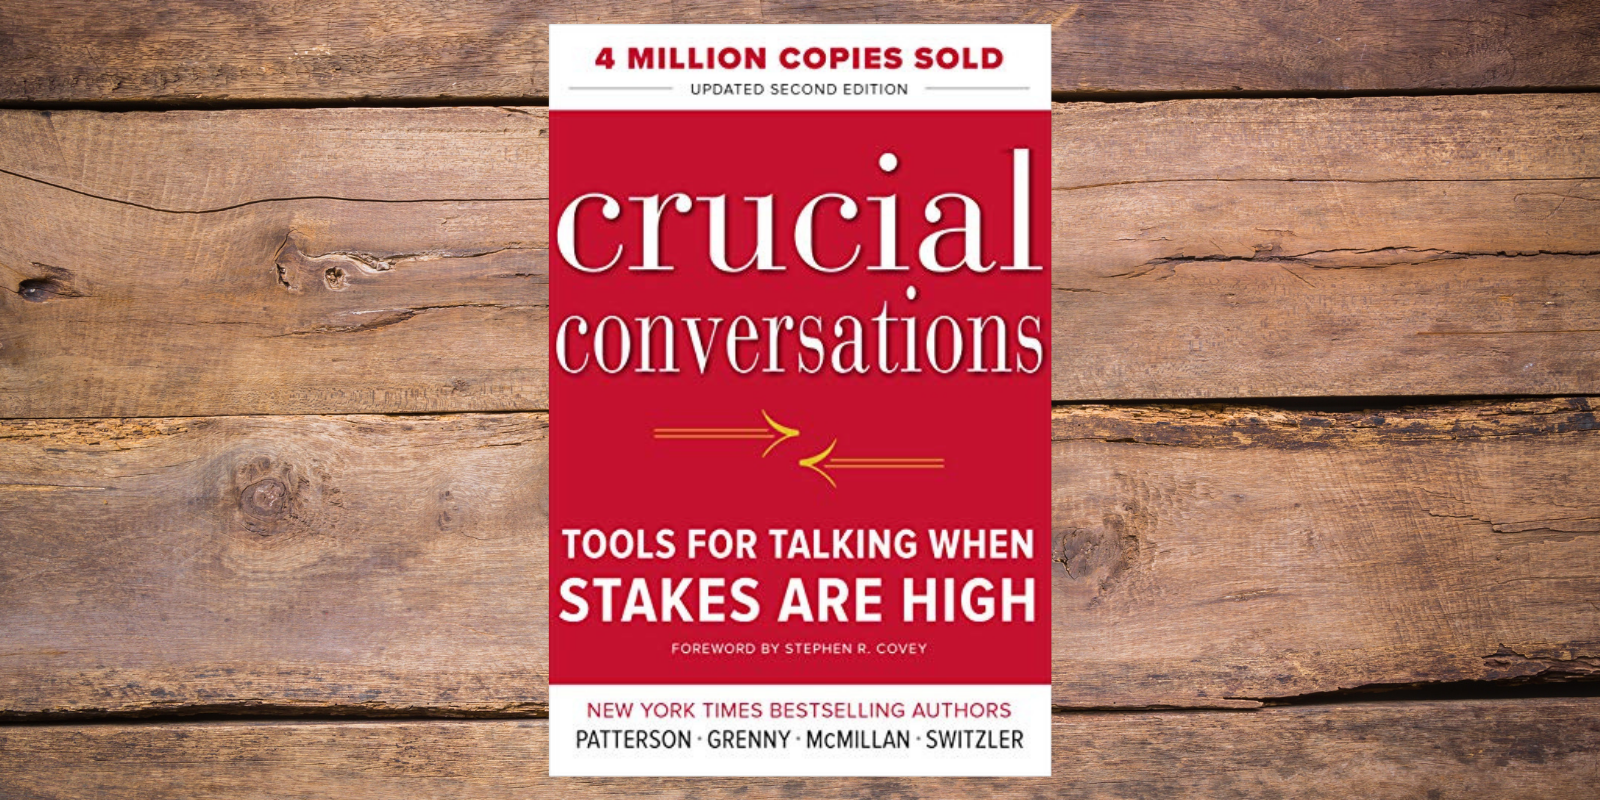 Crucial Conversations – Tools for talking when stakes are high